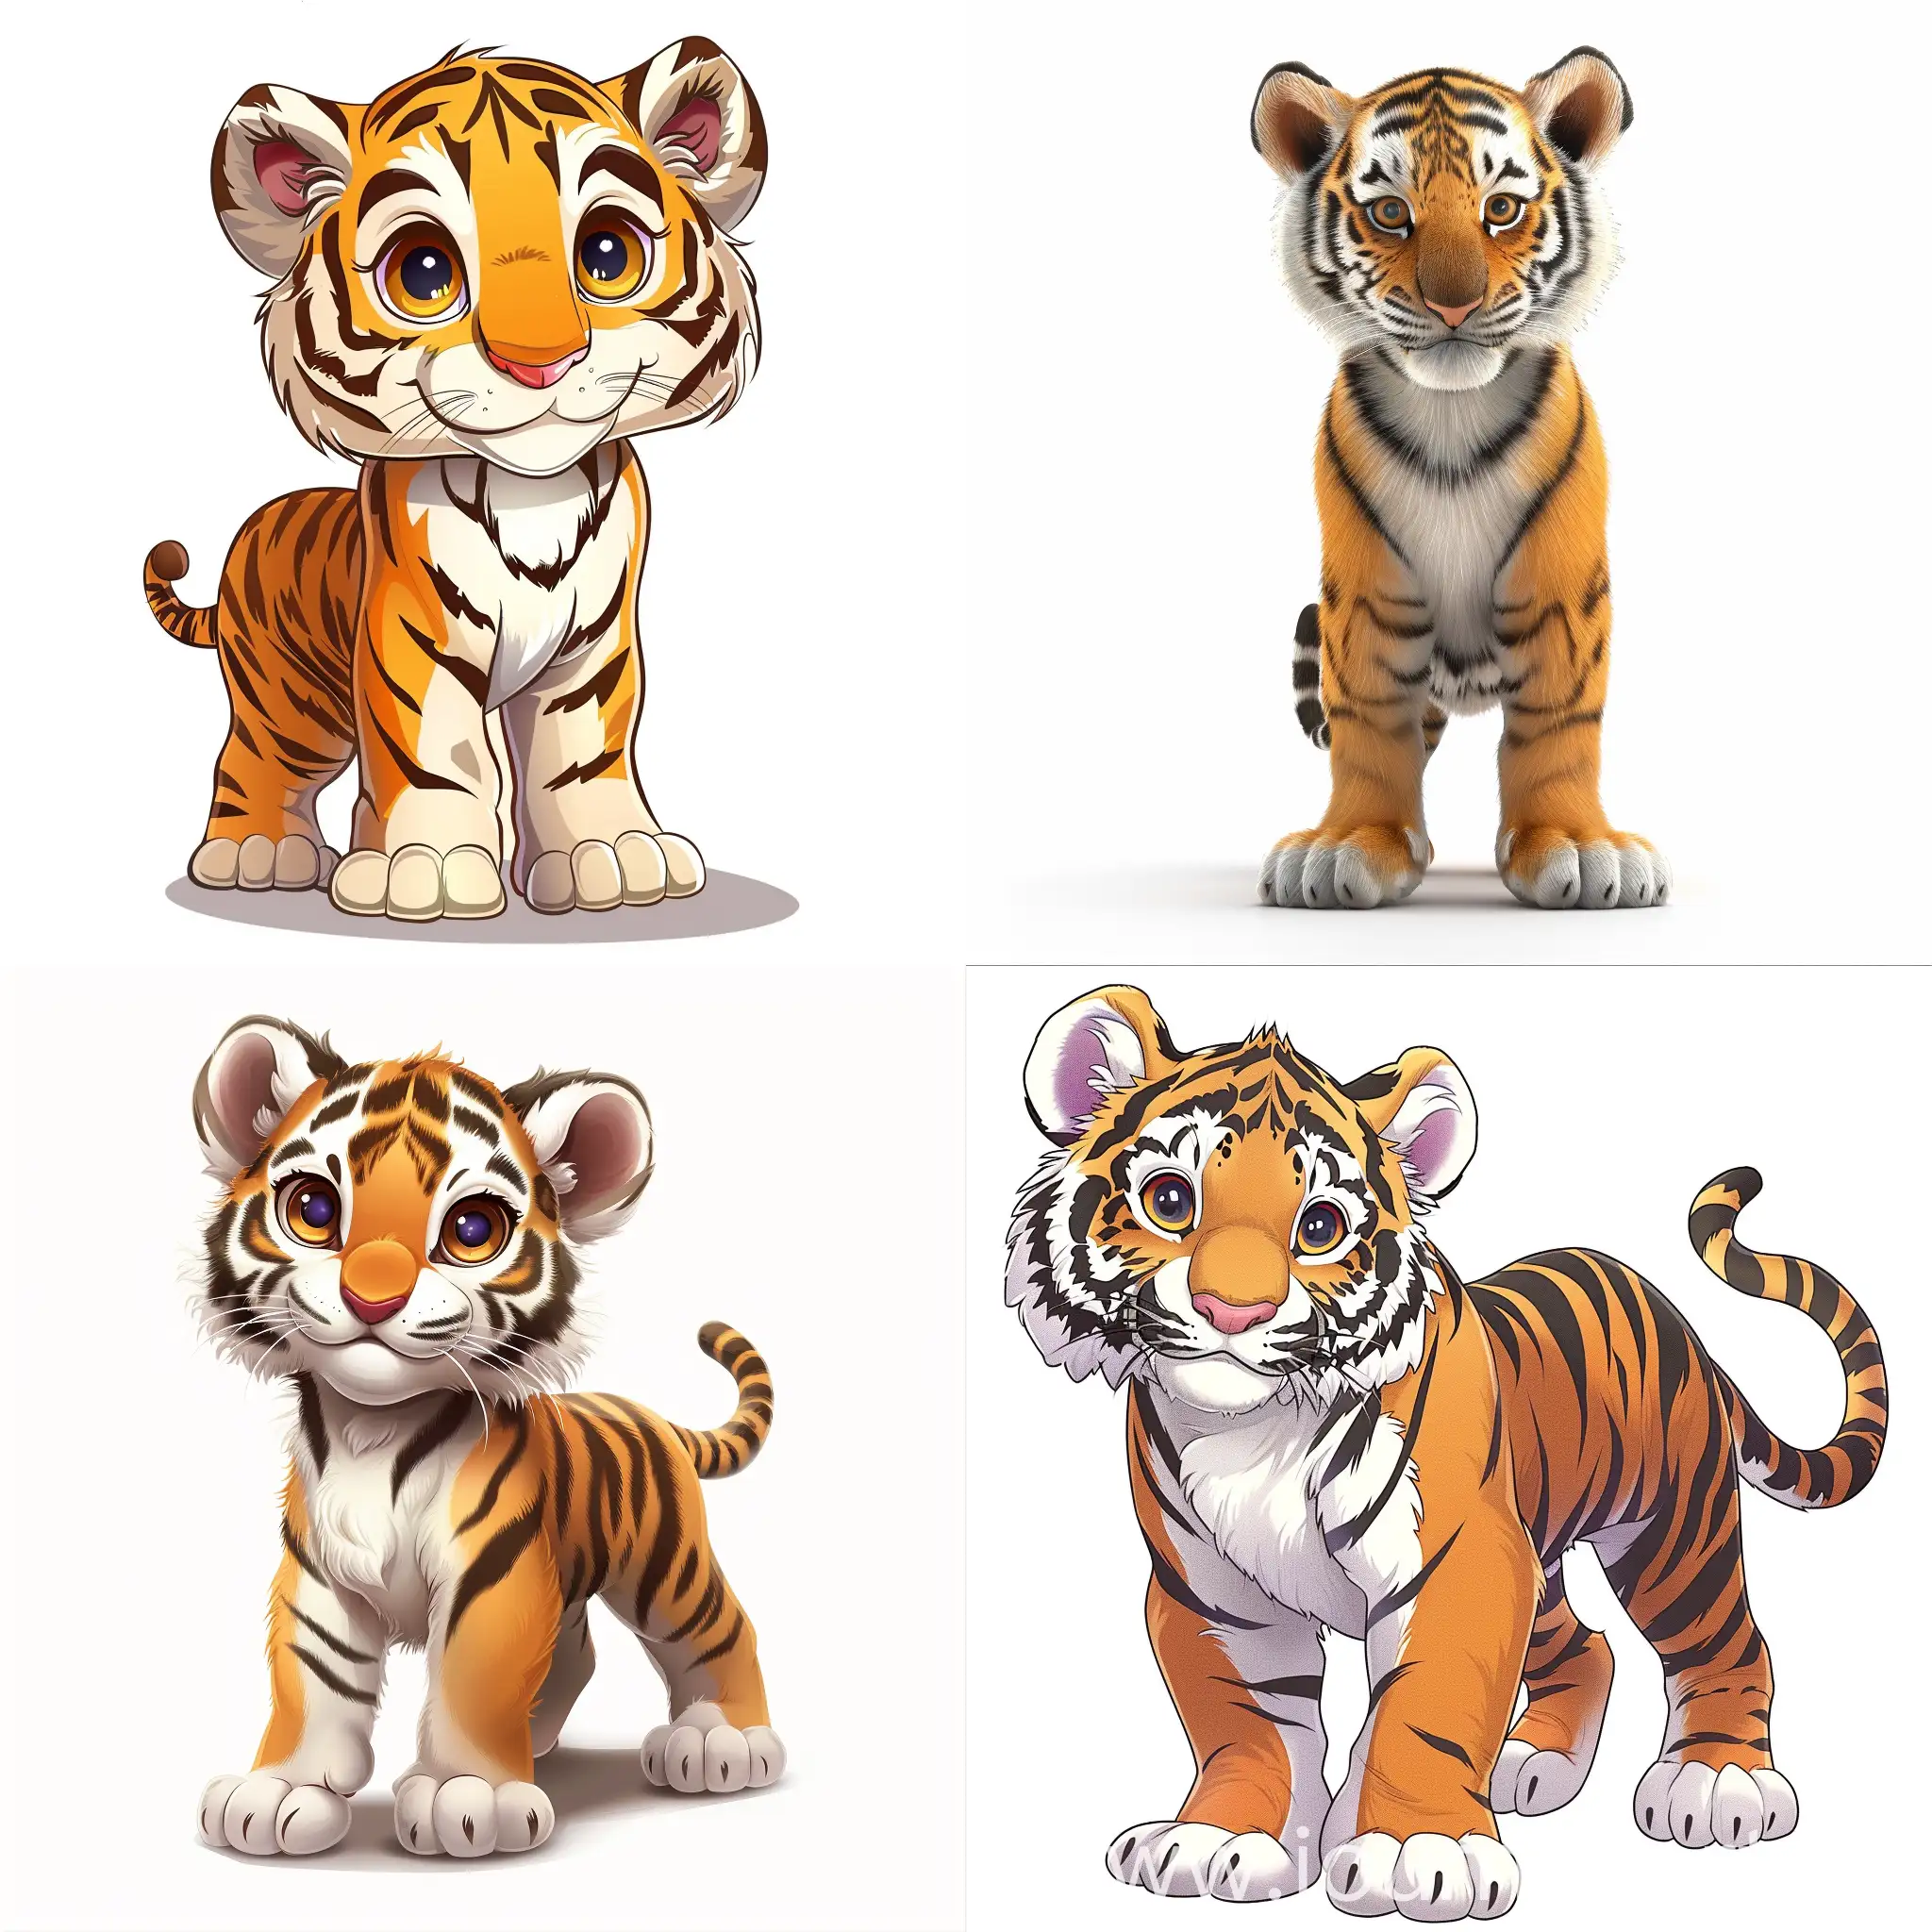 cartoon style, childish style, anthropomorphic tiger cub standing on his feet, front view, white background